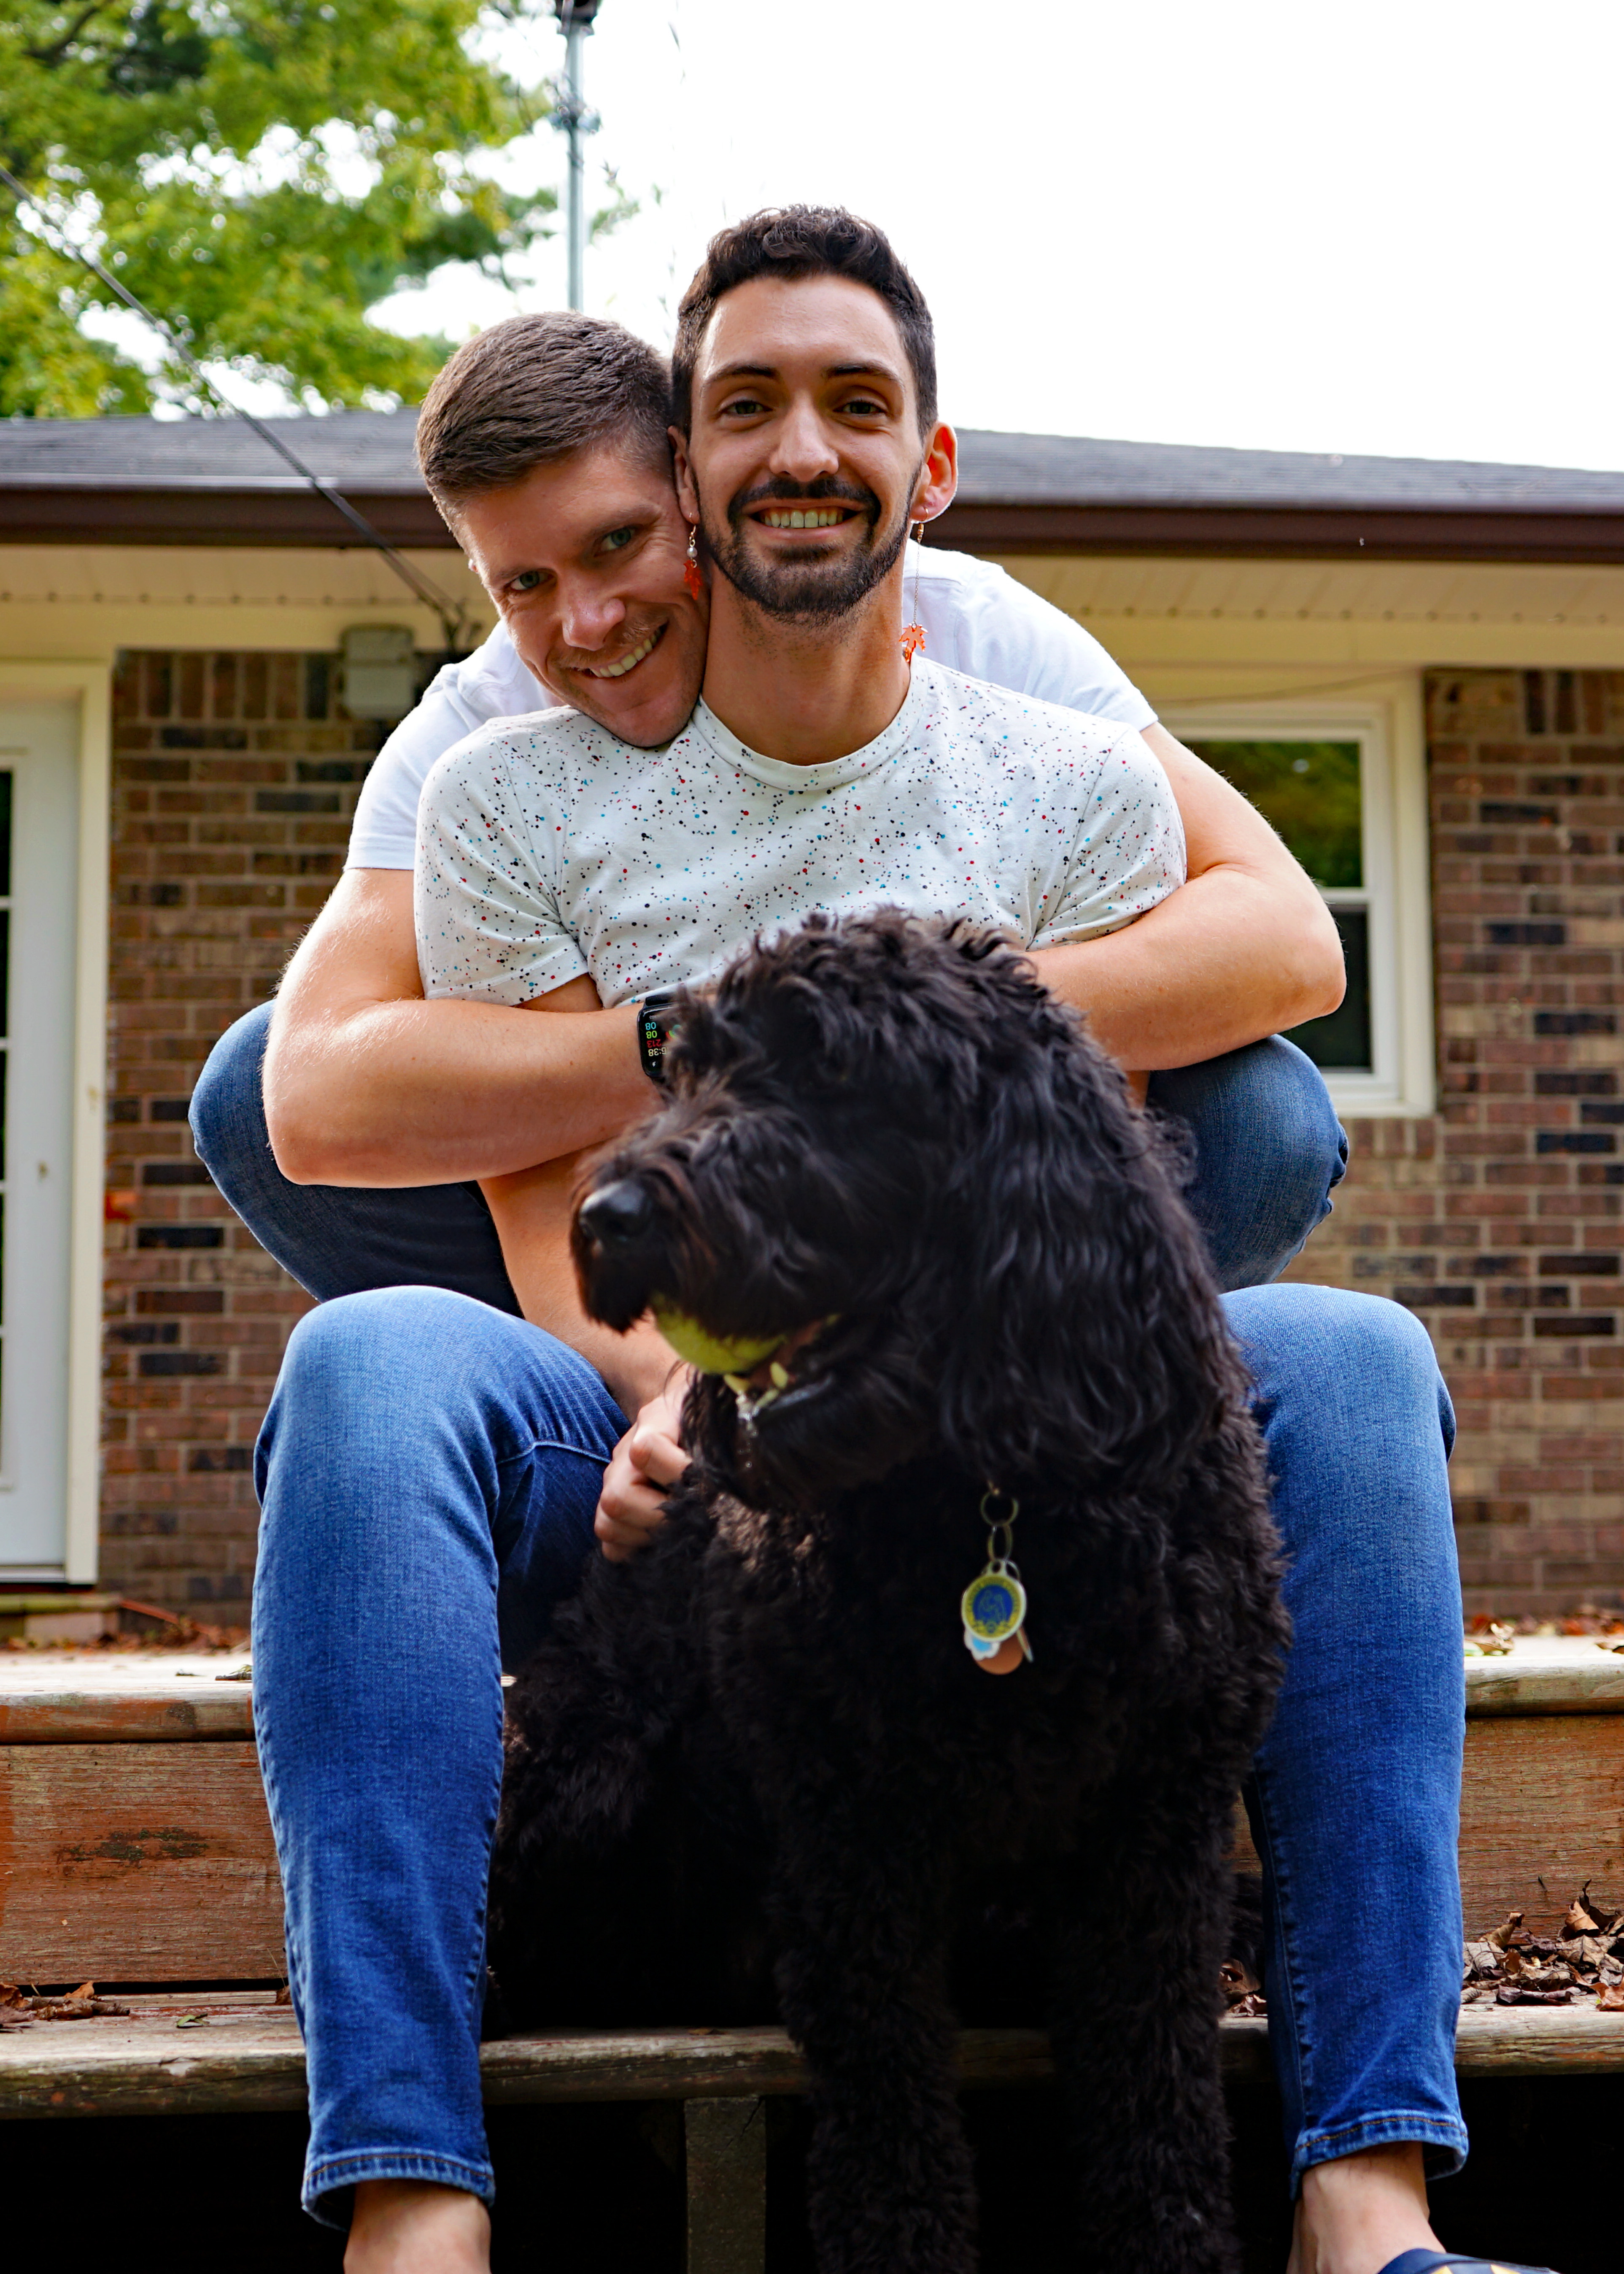 A photo of myself and my fiancé with our dog.